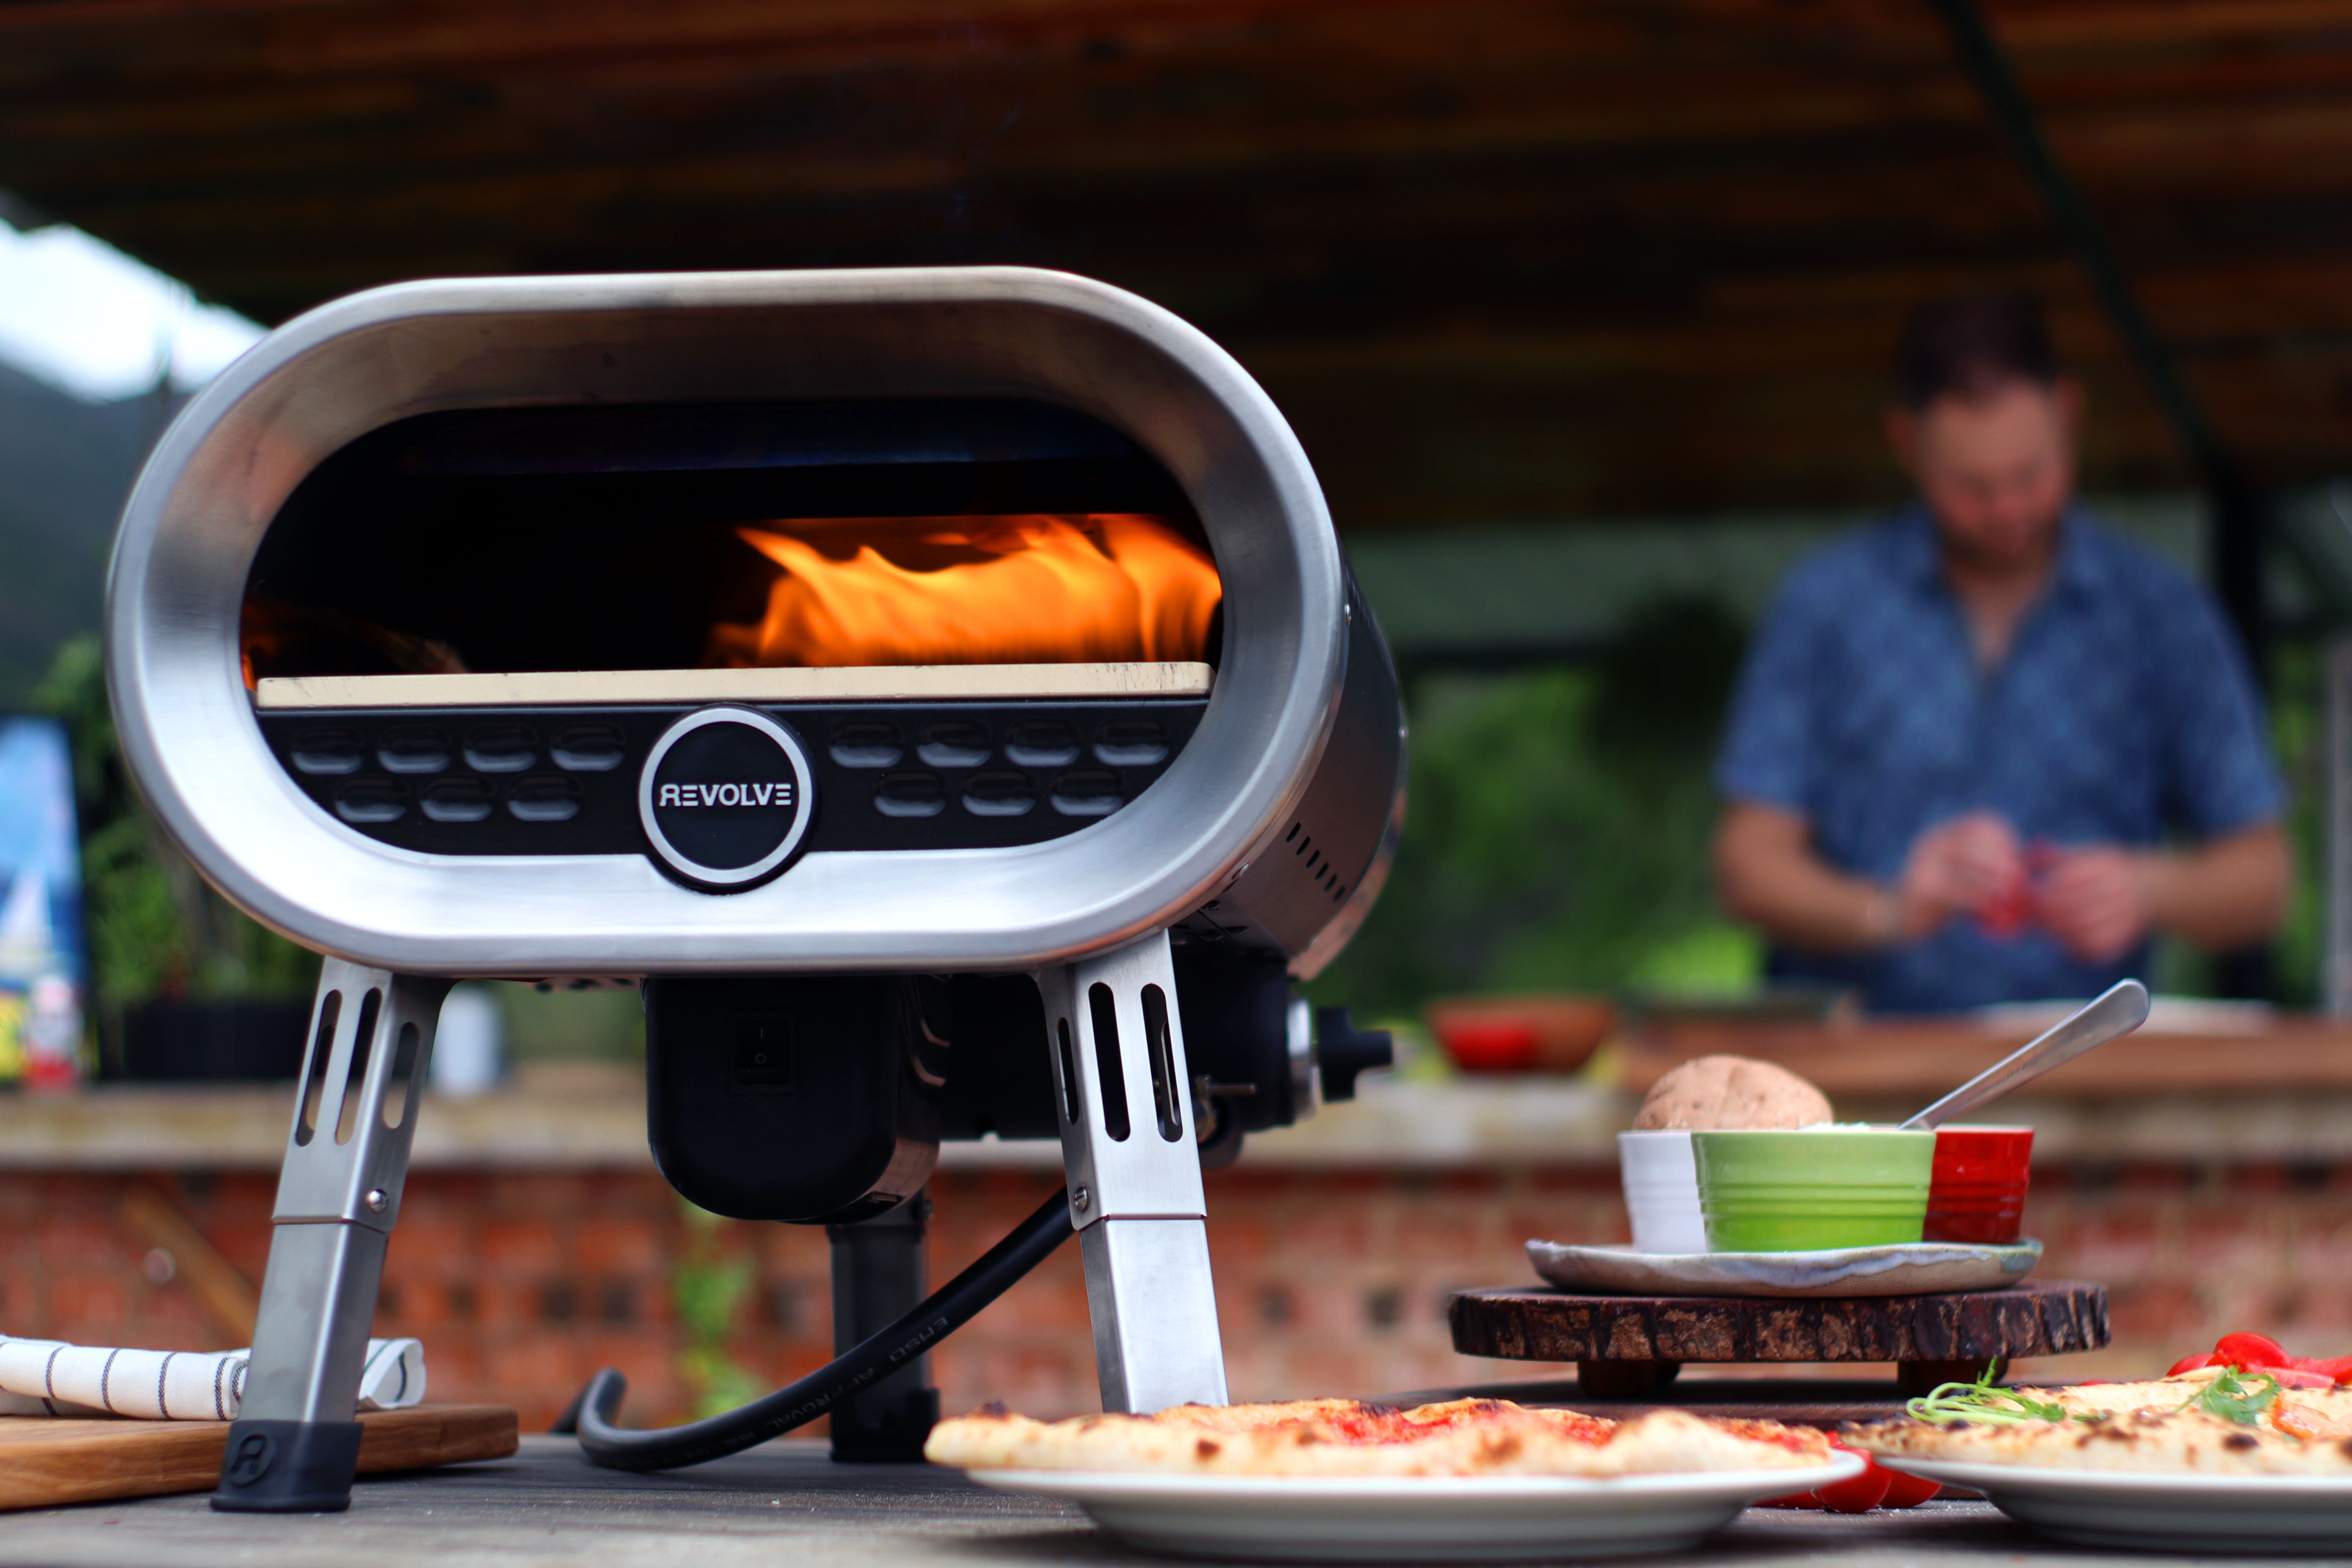 Haloo launches in the UK market its new range of premium and stylish outdoor heating, cooking and lighting ranges at Glee 2022.